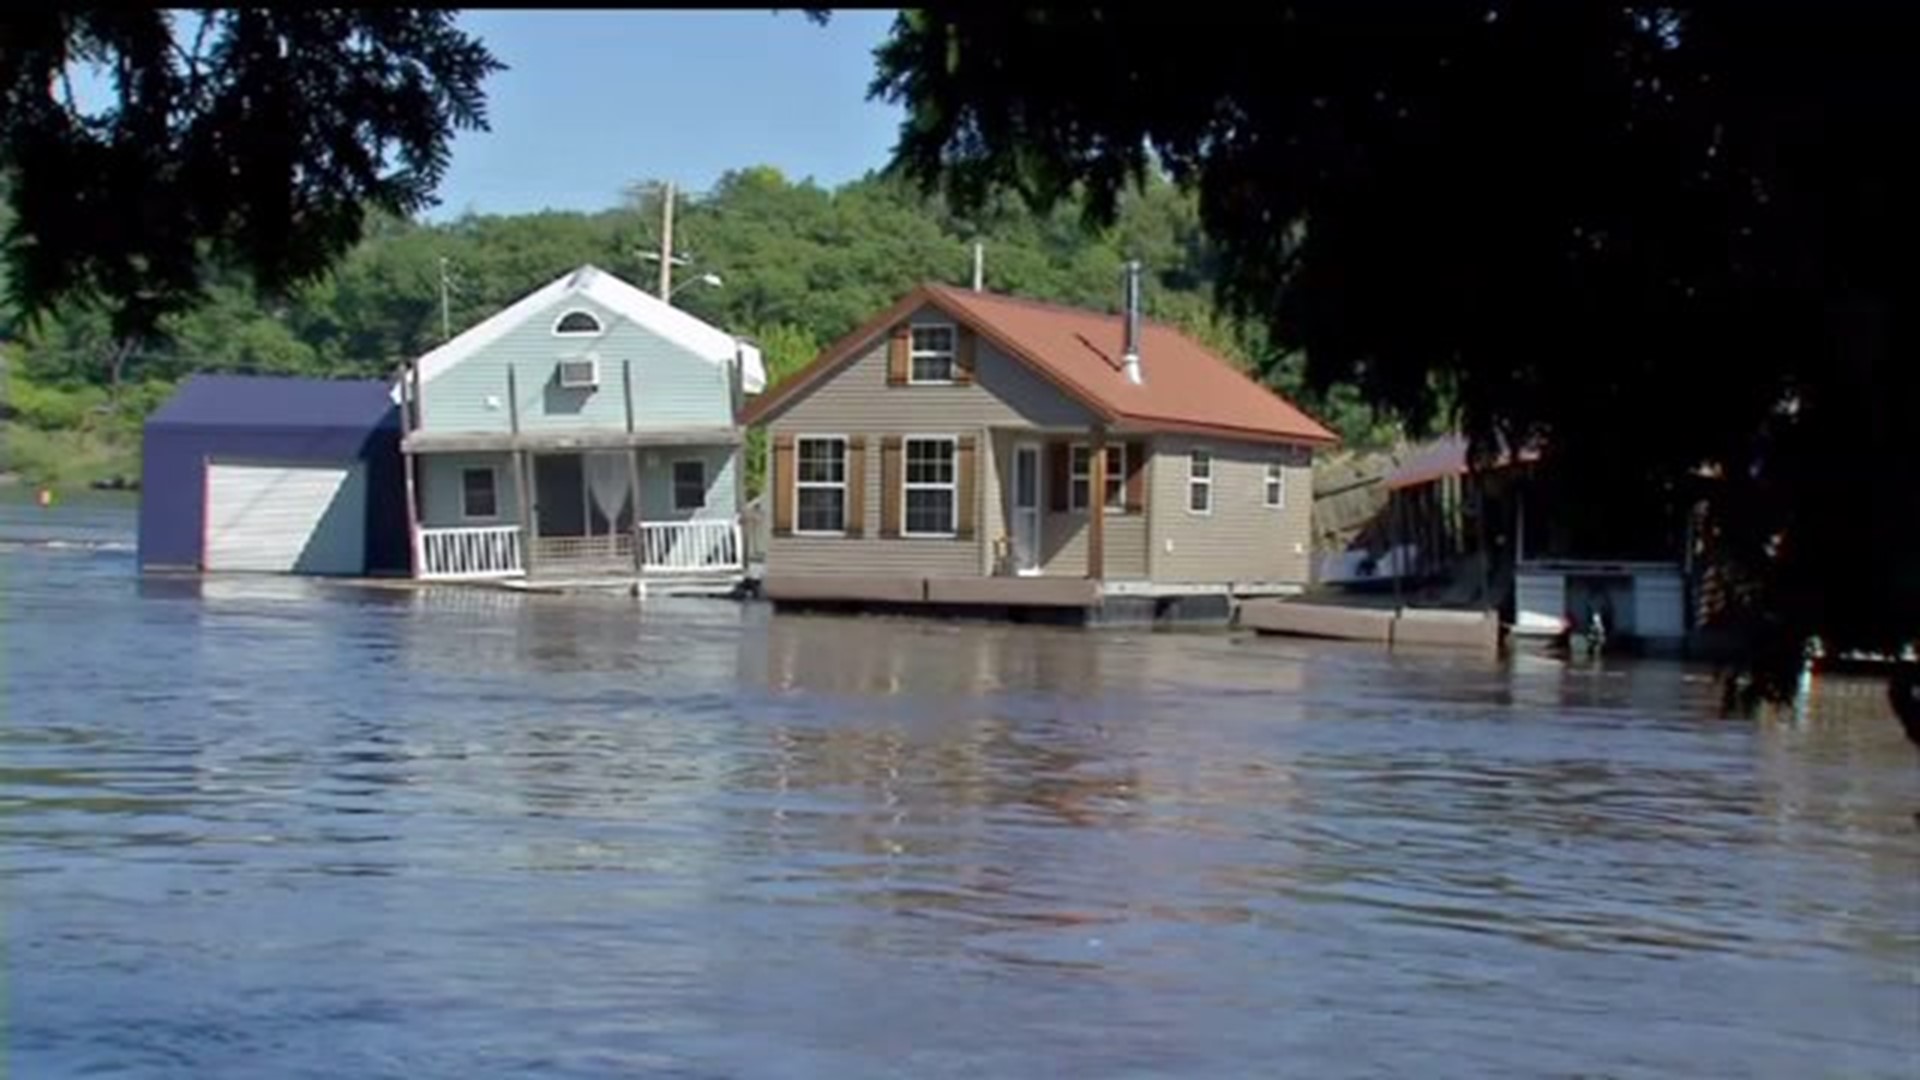 House boat damage due to flooding